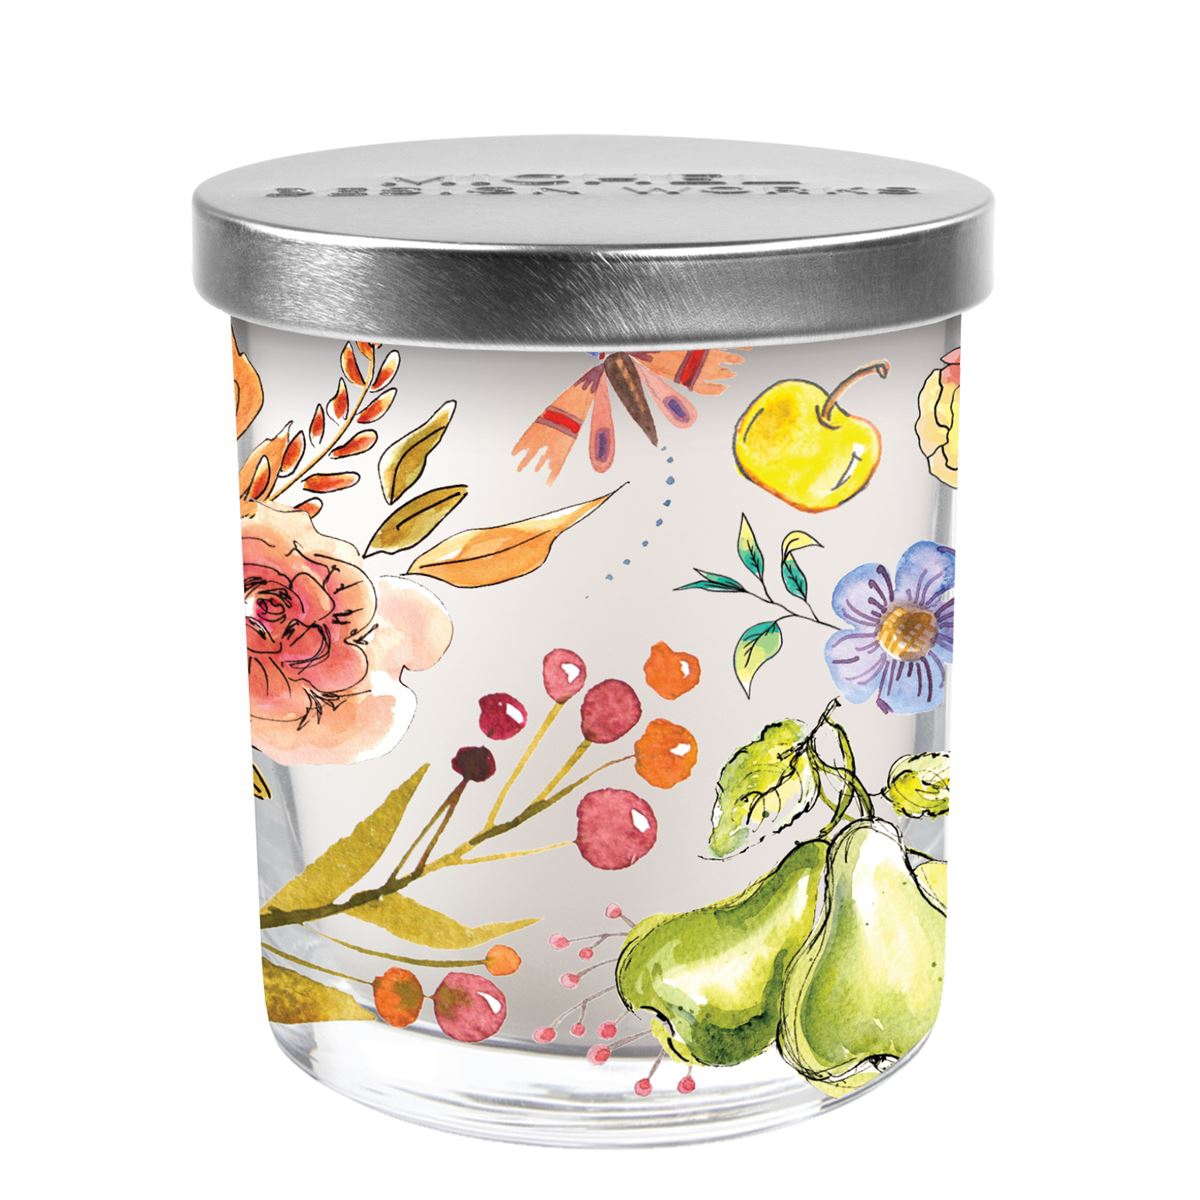 Jubilee Scented Jar Candle MDW 209g